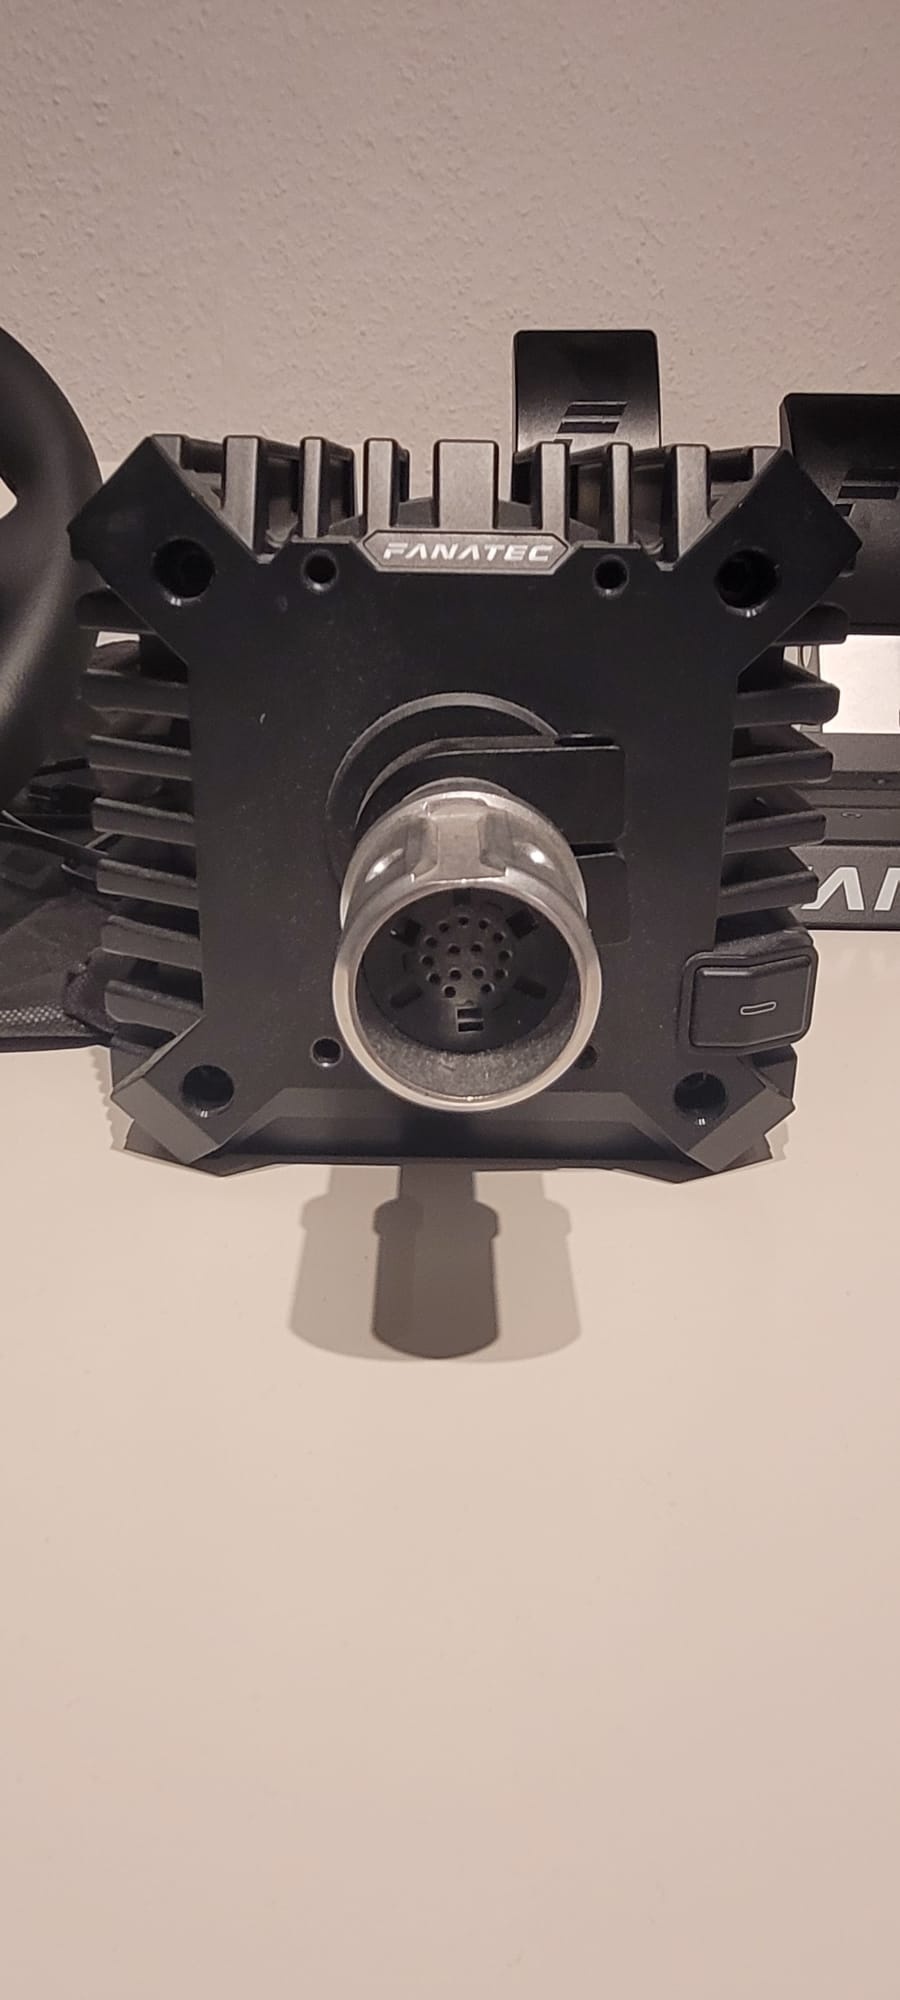 Selling CSL DD 5nm with Wheel and Pedals — Fanatec Forum